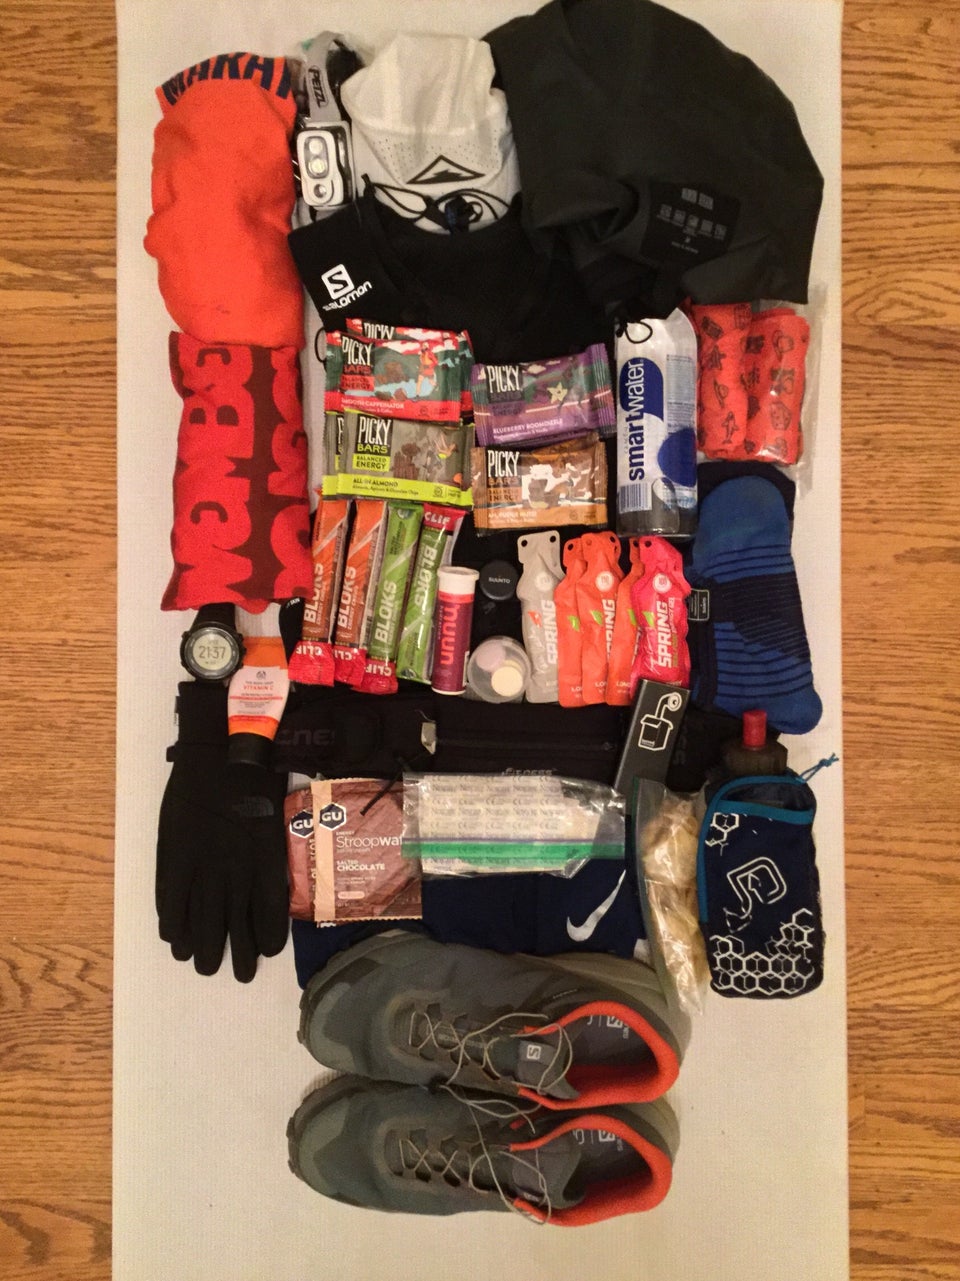 Race kit laid out on a yoga mat.